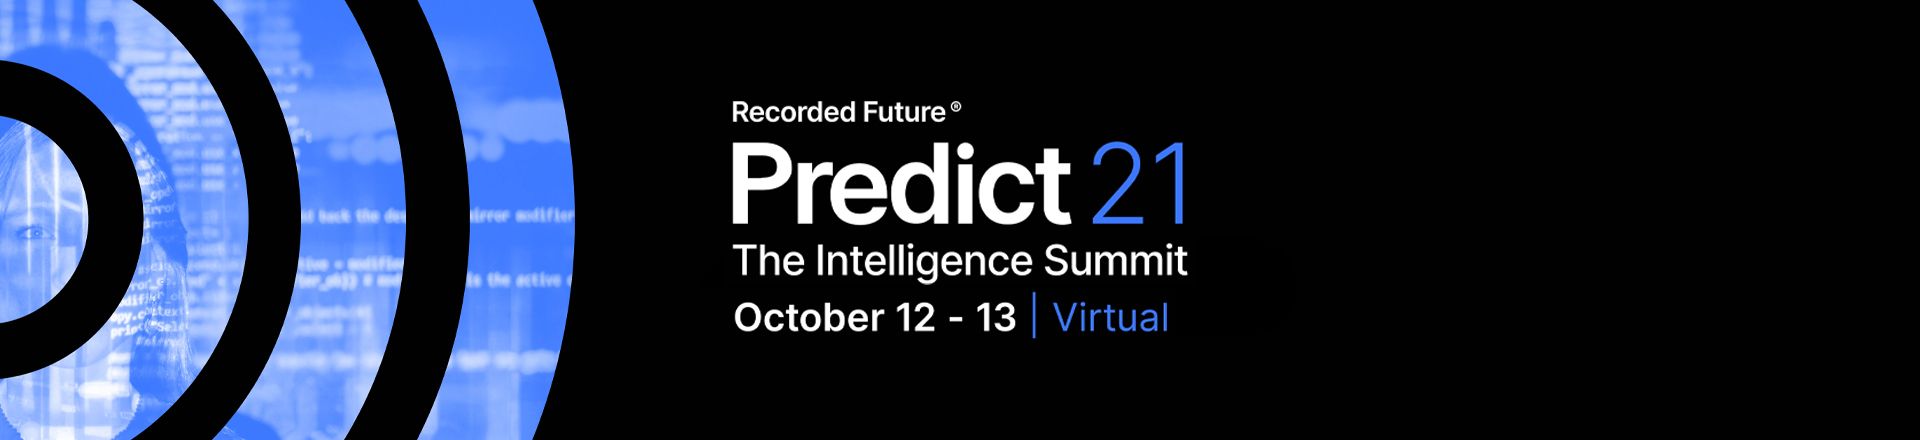 5 Notable Quotes from Predict21: Wednesday, October 13th